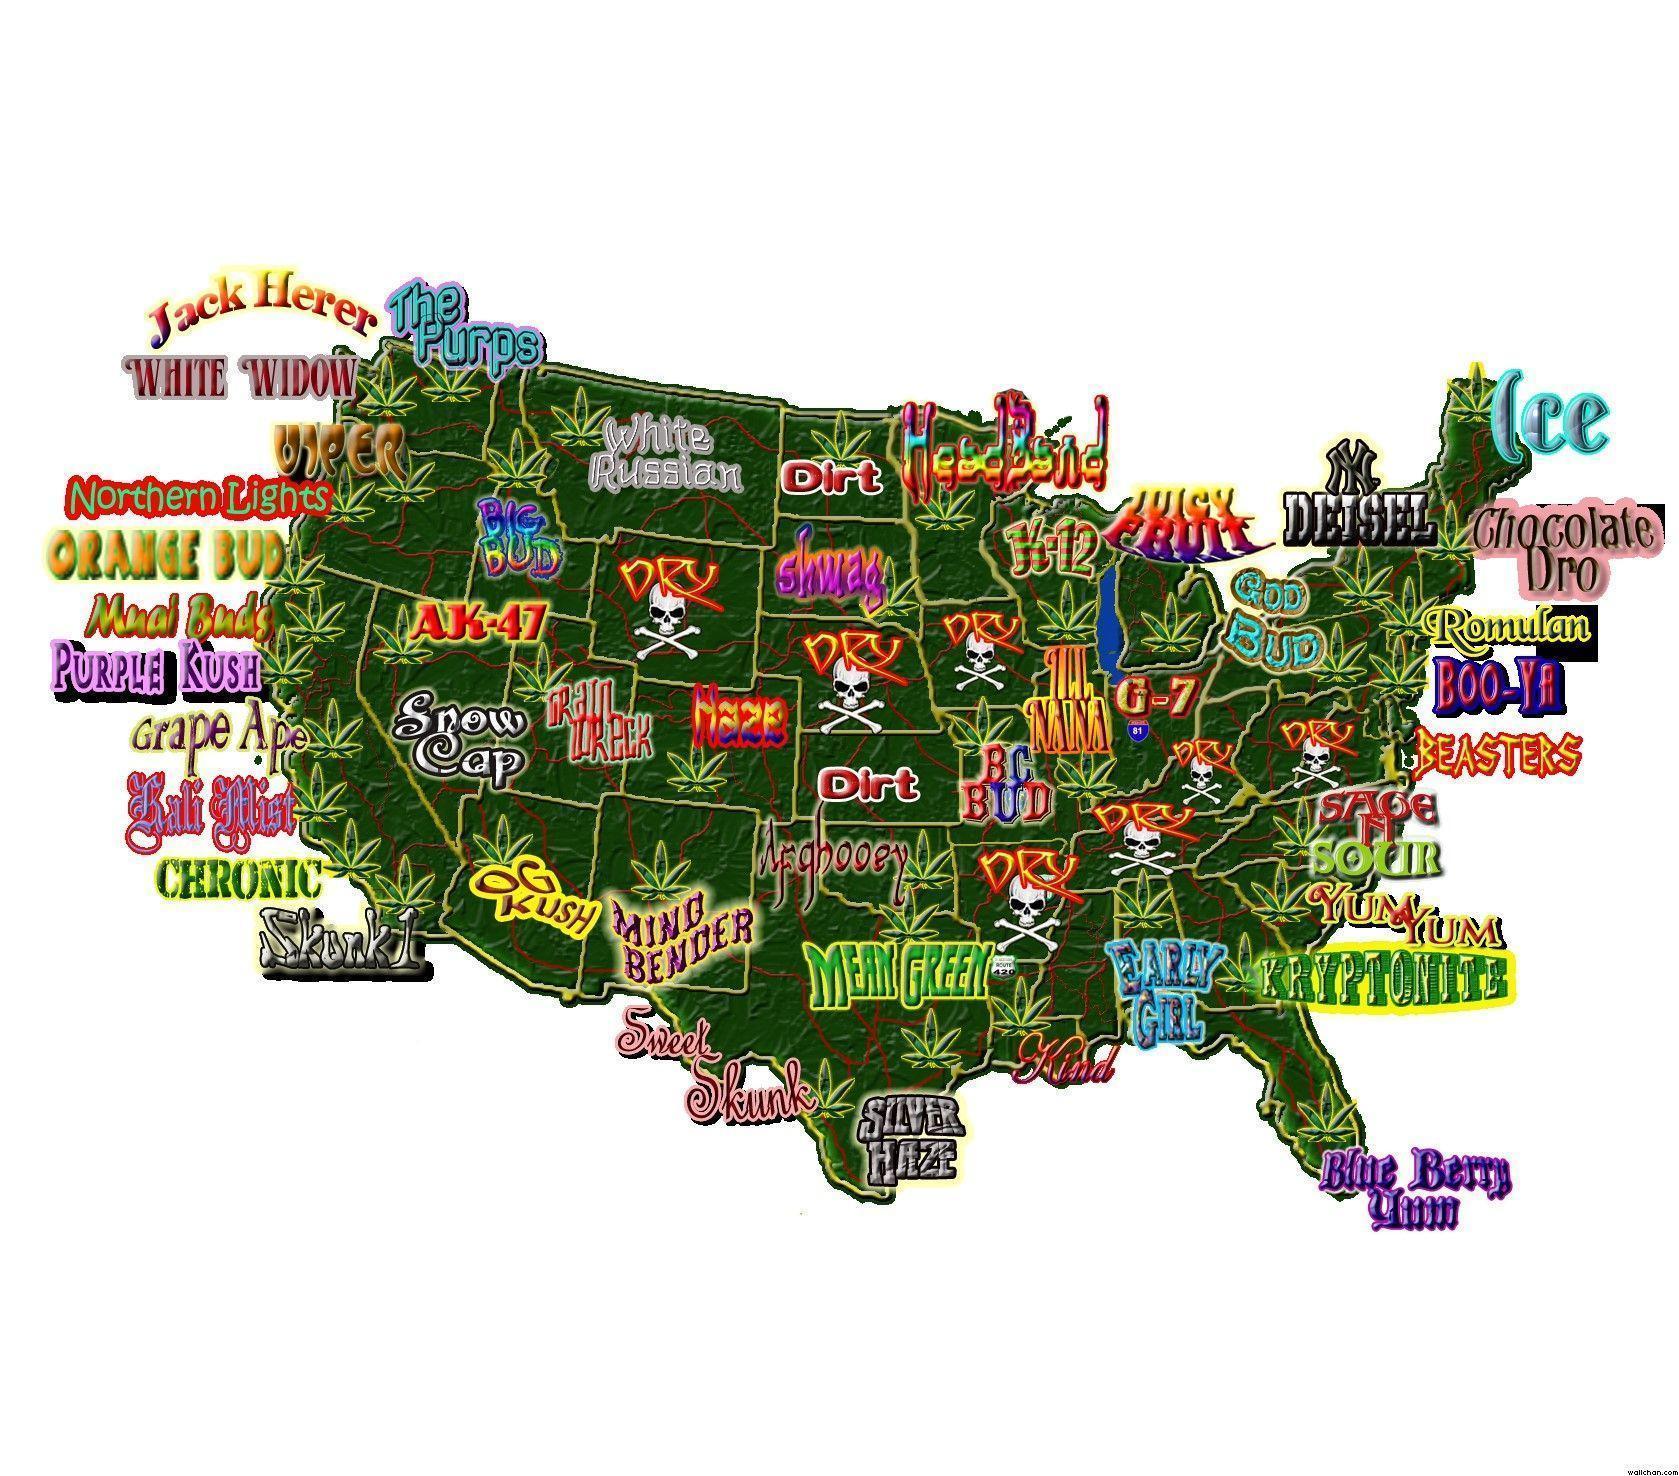 USA weed map Archives